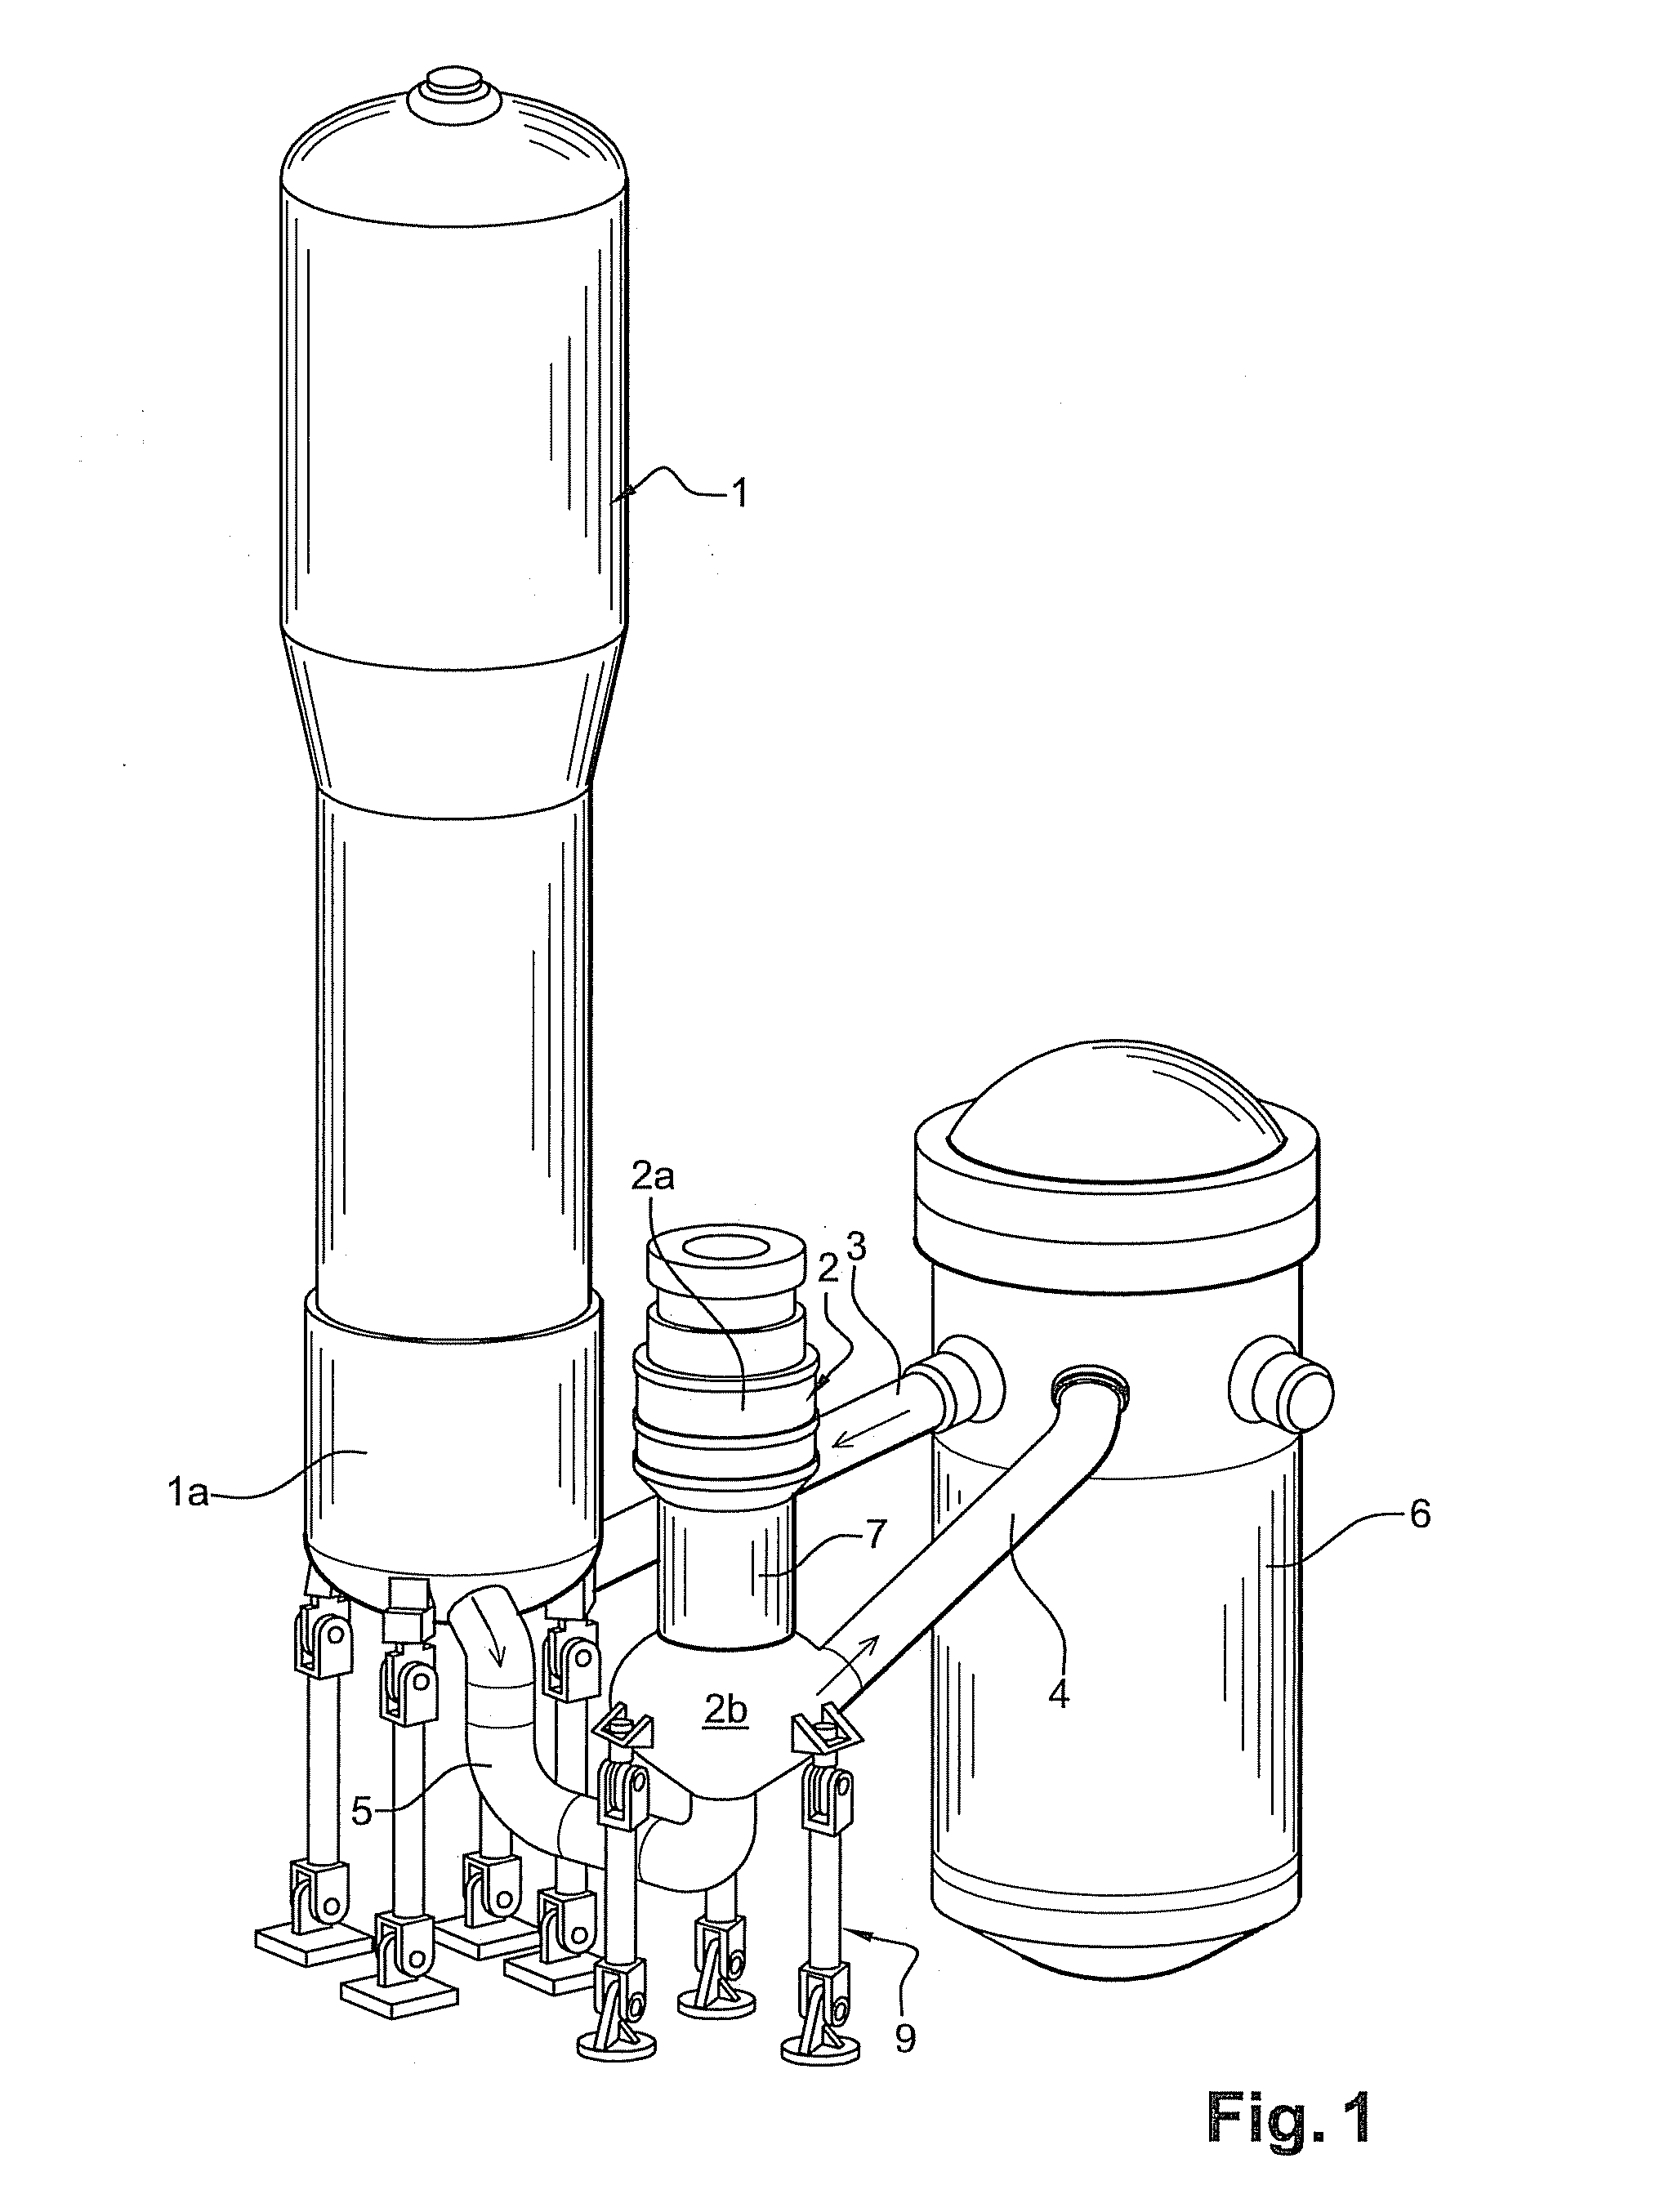 Motor stand of a primary motor-driven pump unit of a pressurized water nuclear reactor